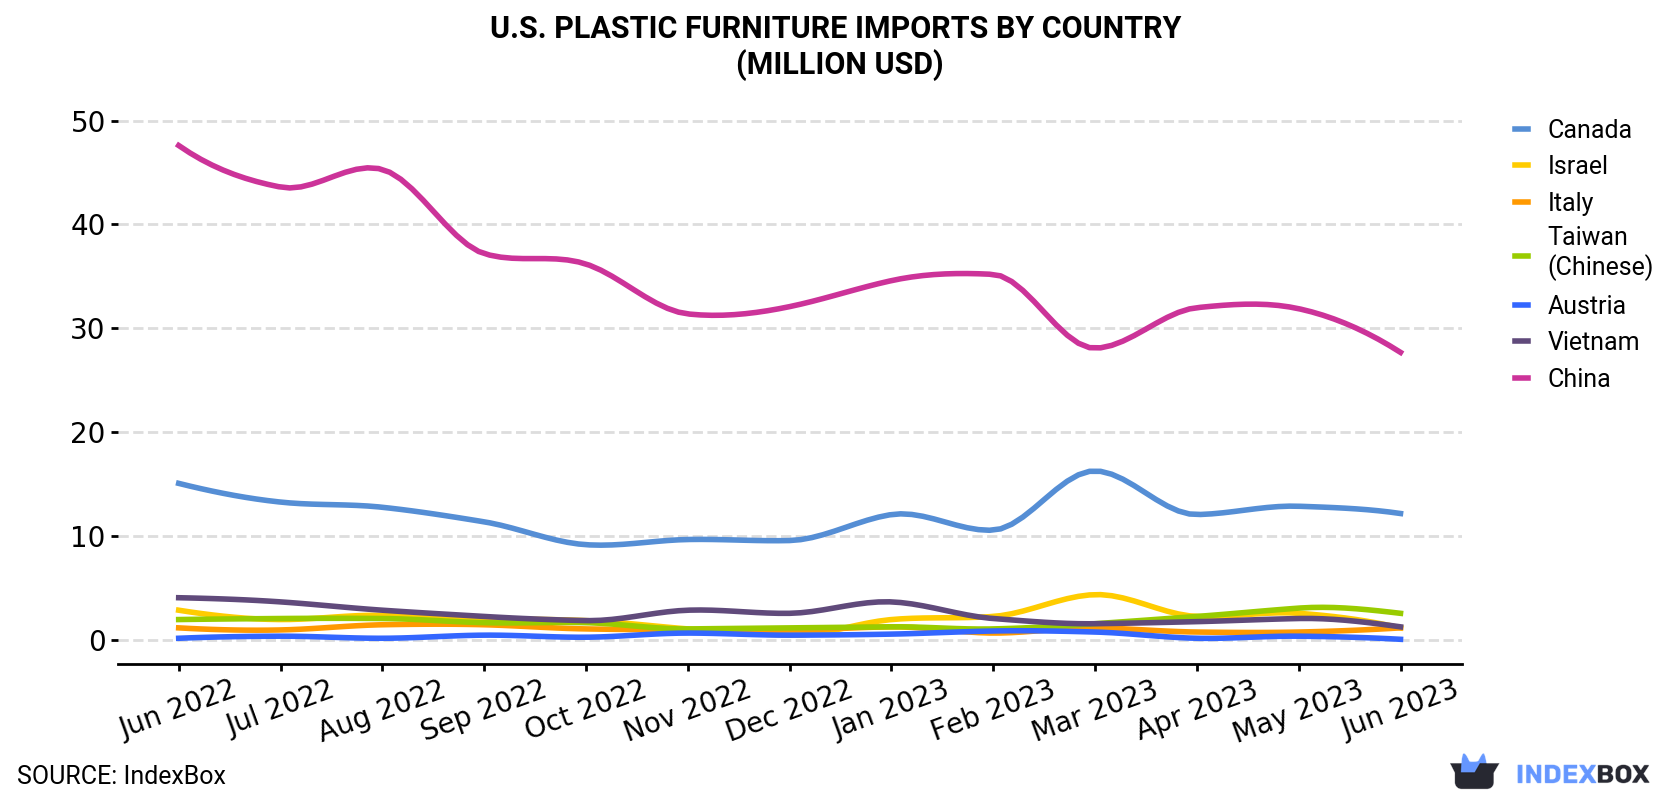 U.S. Plastic Furniture Imports By Country (Million USD)